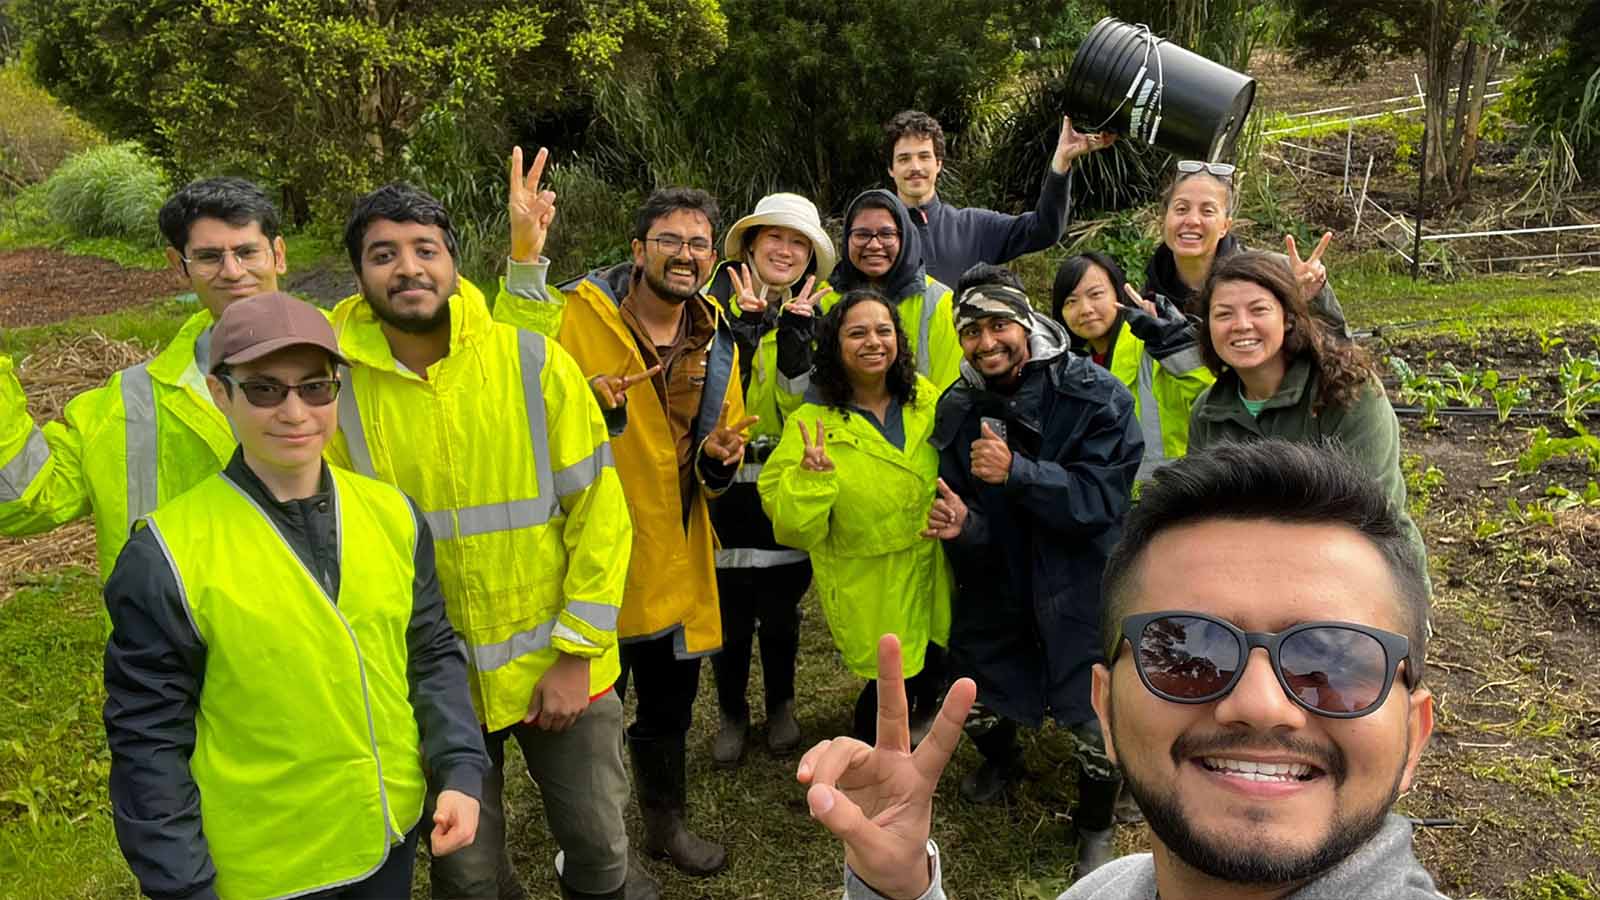 UOW student Vatsal stands with a group of other peoople planting trees